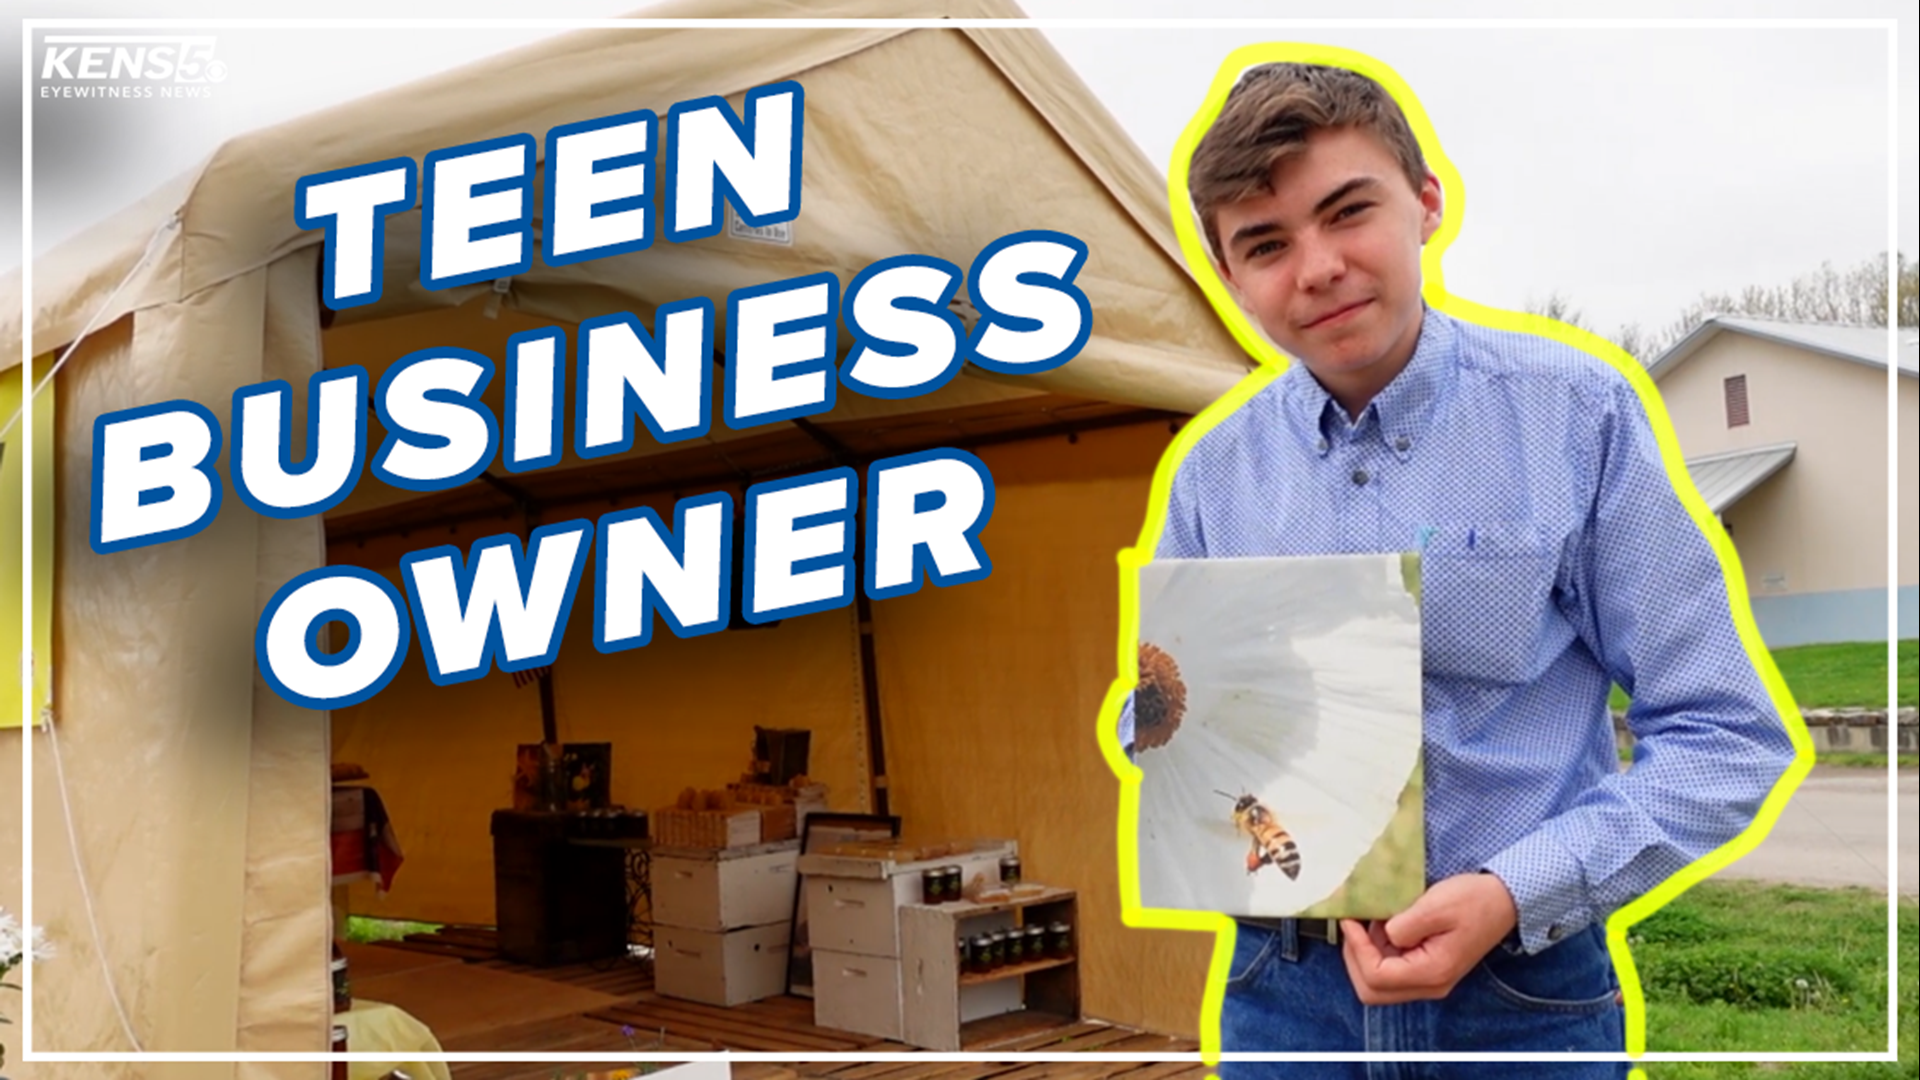 This teen has made a business of preserving hives after removing them from unwanted places. KENS 5's Lexi Hazlett introduces you to Trent Anderson.